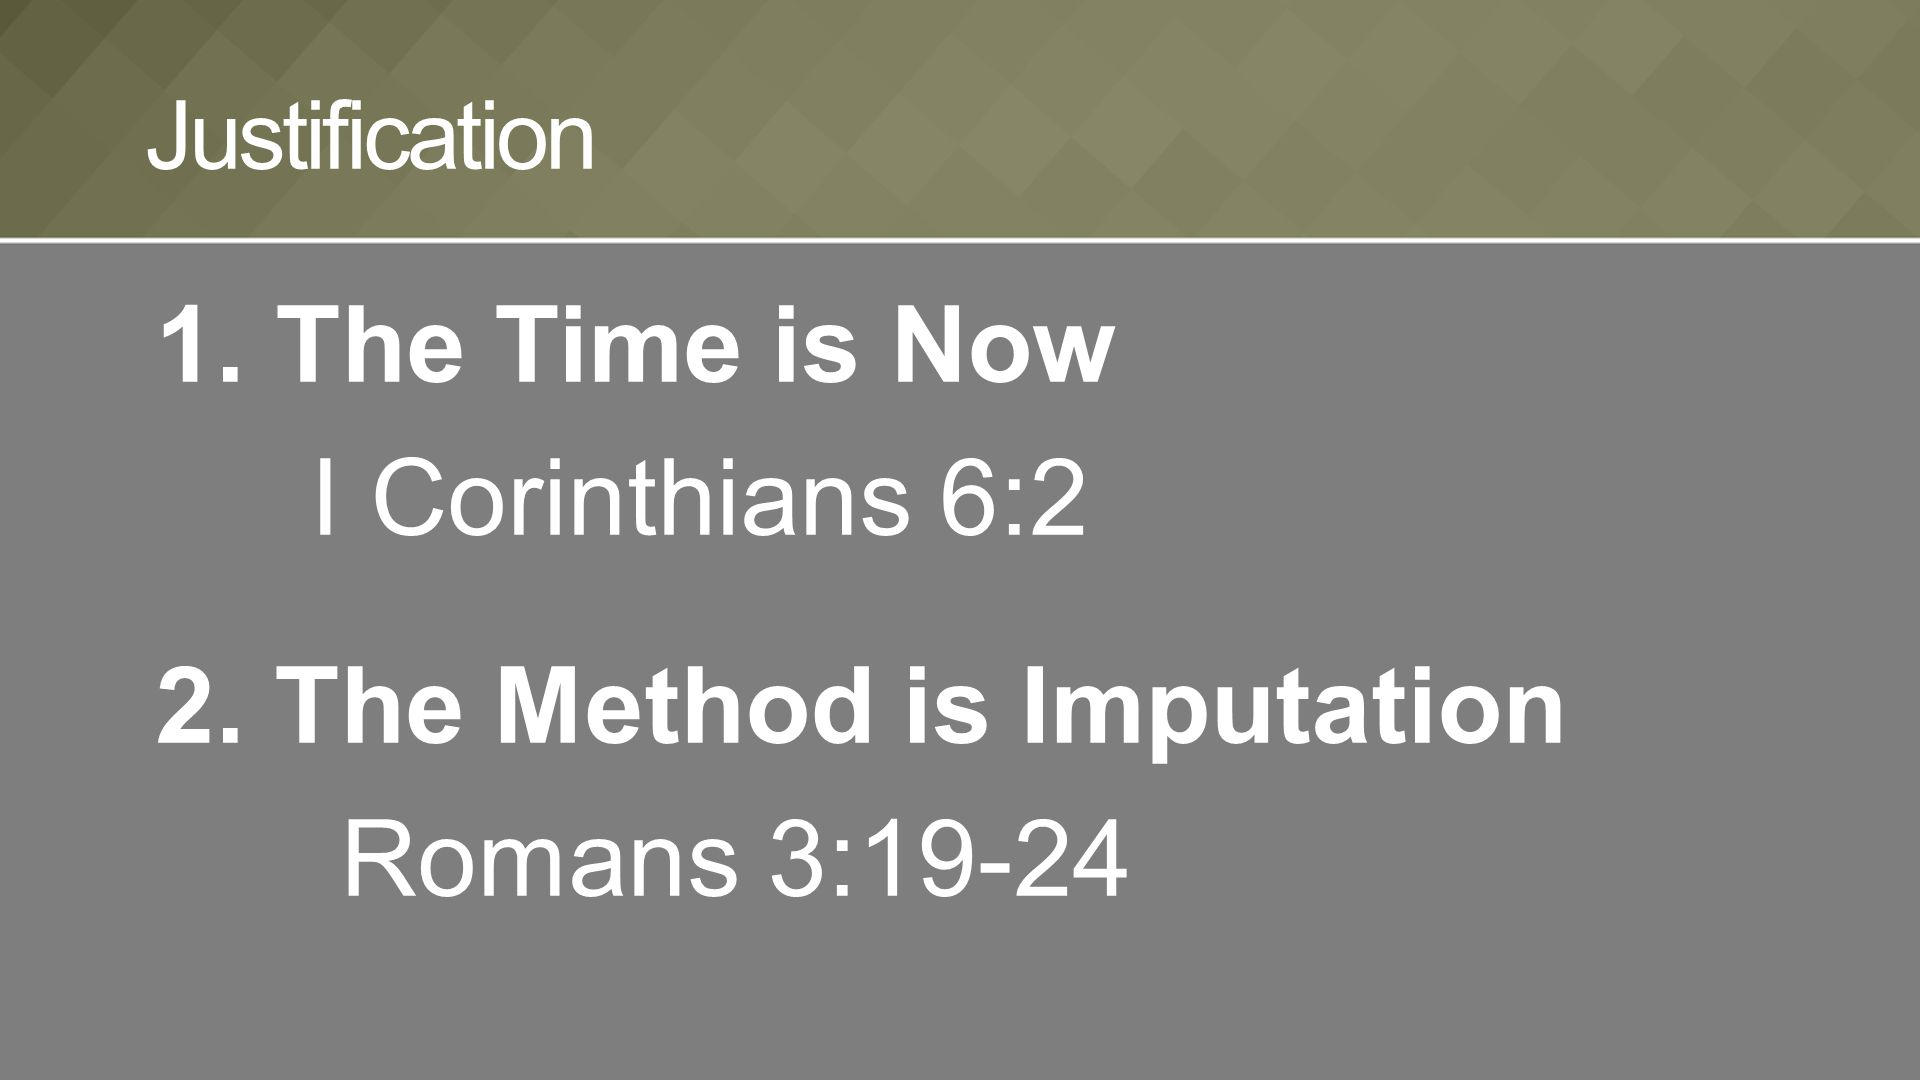 1.The Time is Now I Corinthians 6:2 2. The Method is Imputation Romans 3:19-24 Justification